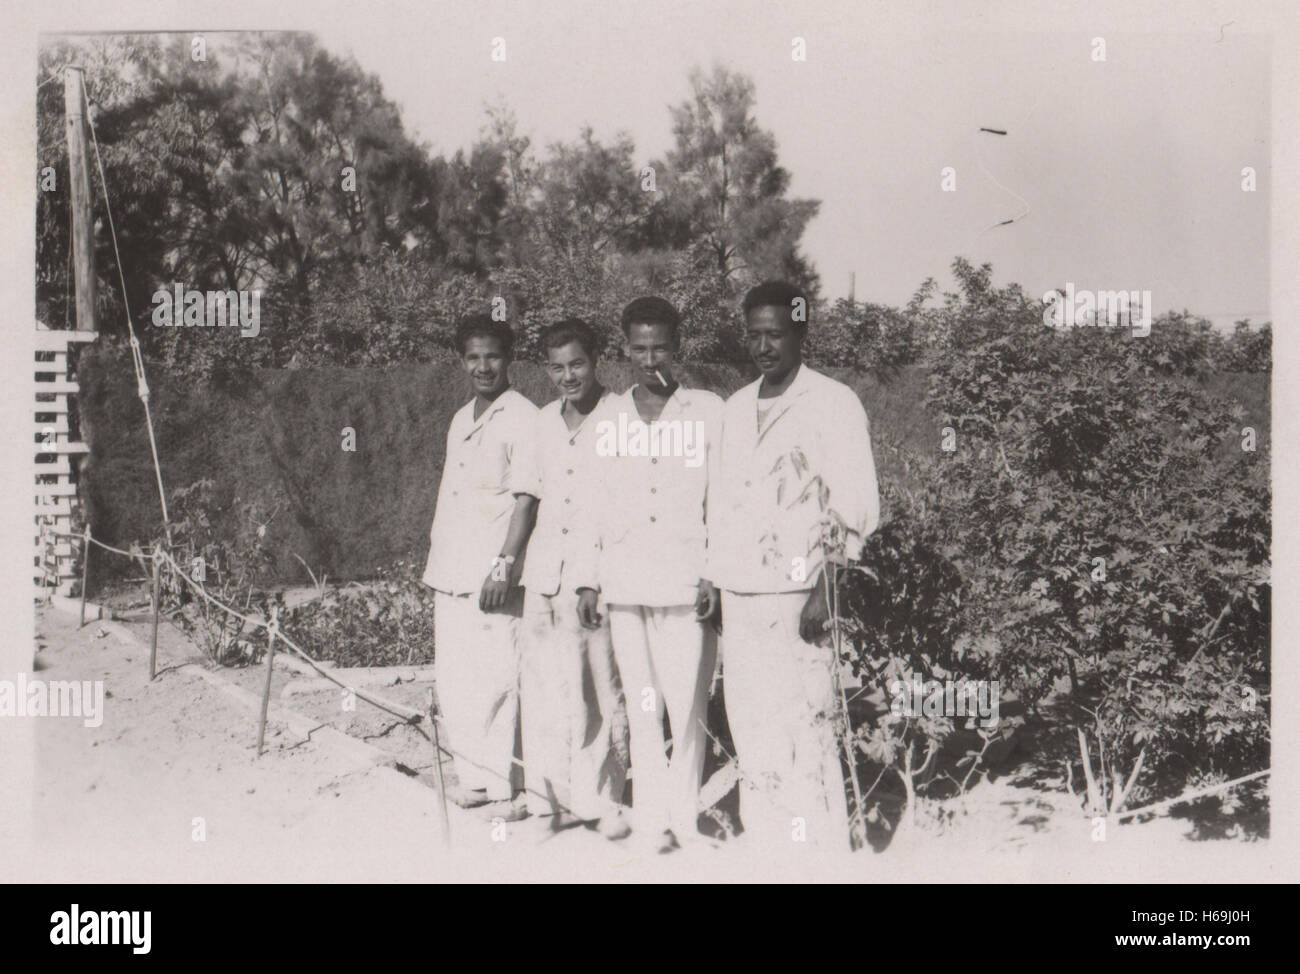 Egyptian waiters working for the British army in the Sergeants mess at 10 Base Ordnance Depot Royal Army Ordnance Corps (RAOC) camp at Geneifa Ismailia area near the Suez Canal 1952 in the period prior to withdrawal of British troops from the Suez Canal zone and the Suez Crisis Stock Photo